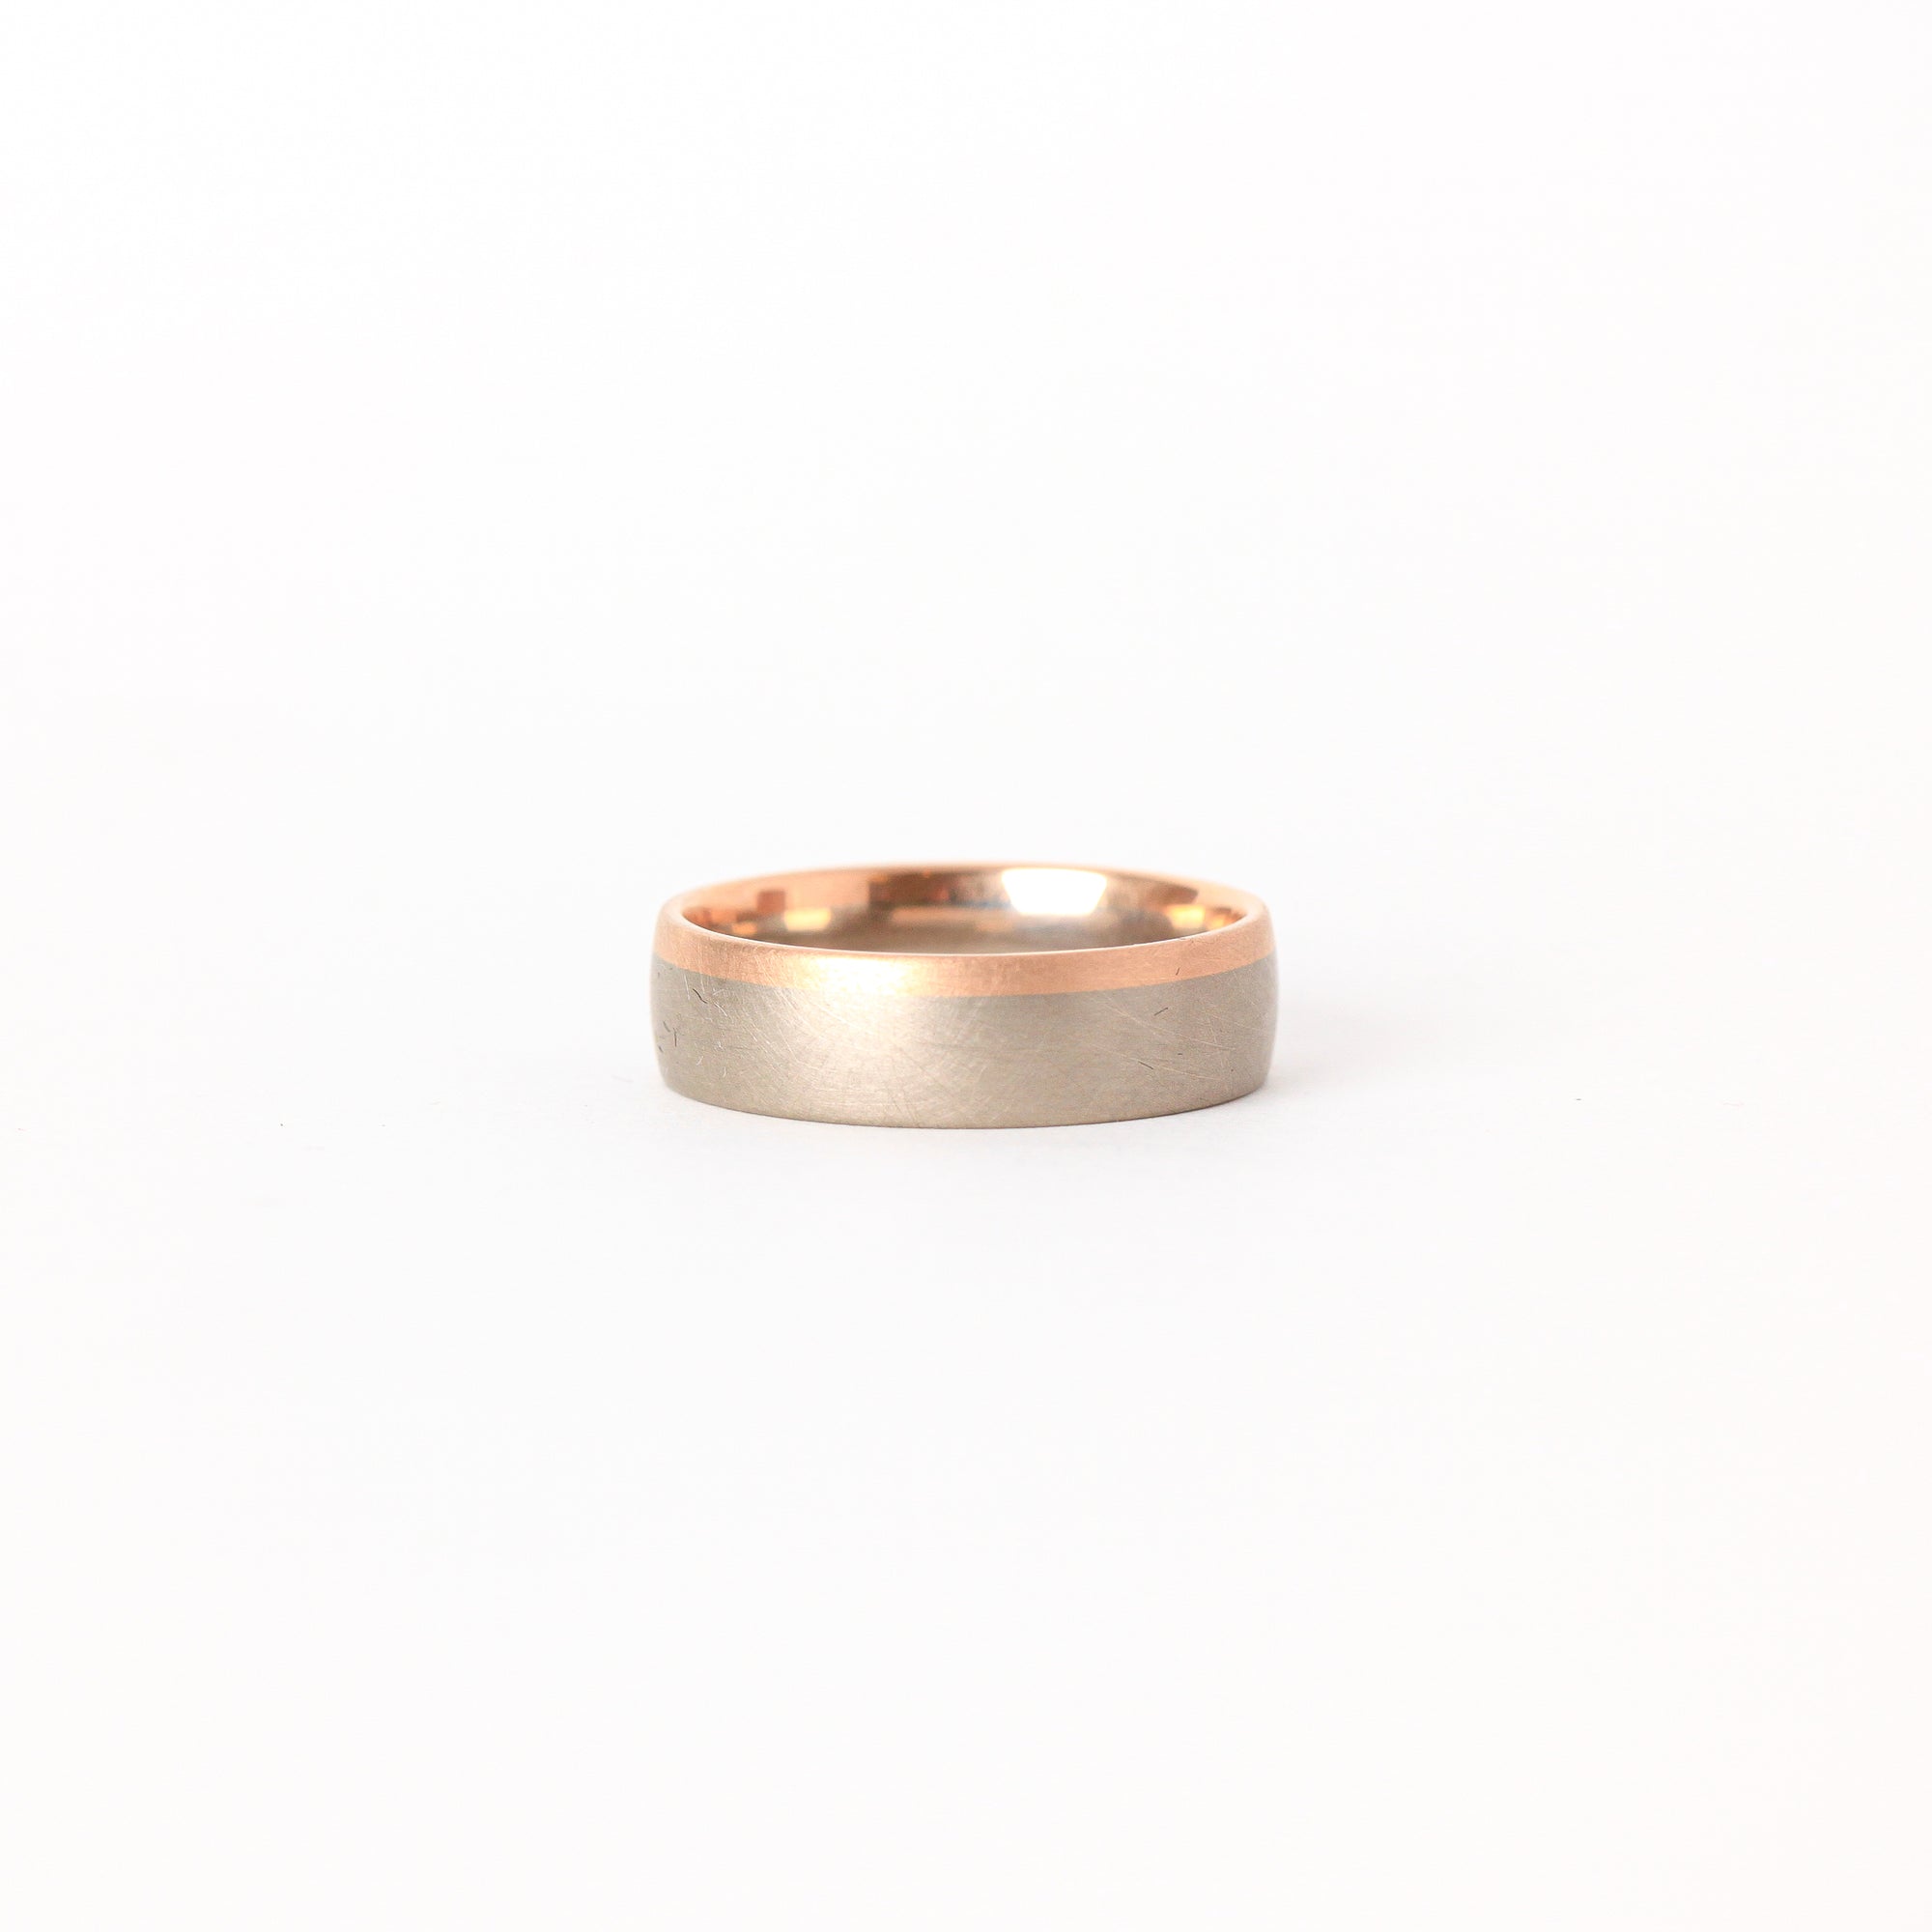 Handmade  Wedding Band in 18ct White and Rose Gold